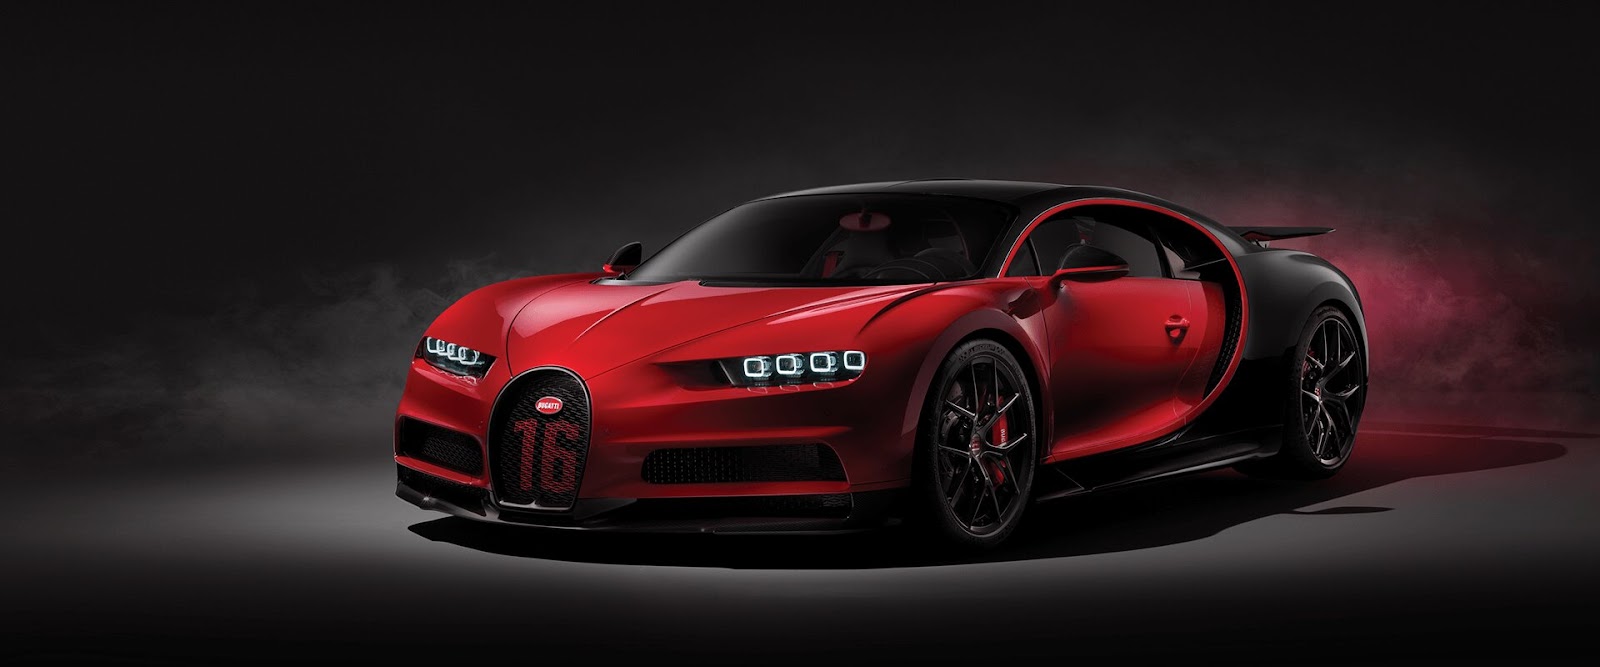 how much is a Bugatti Chiron 